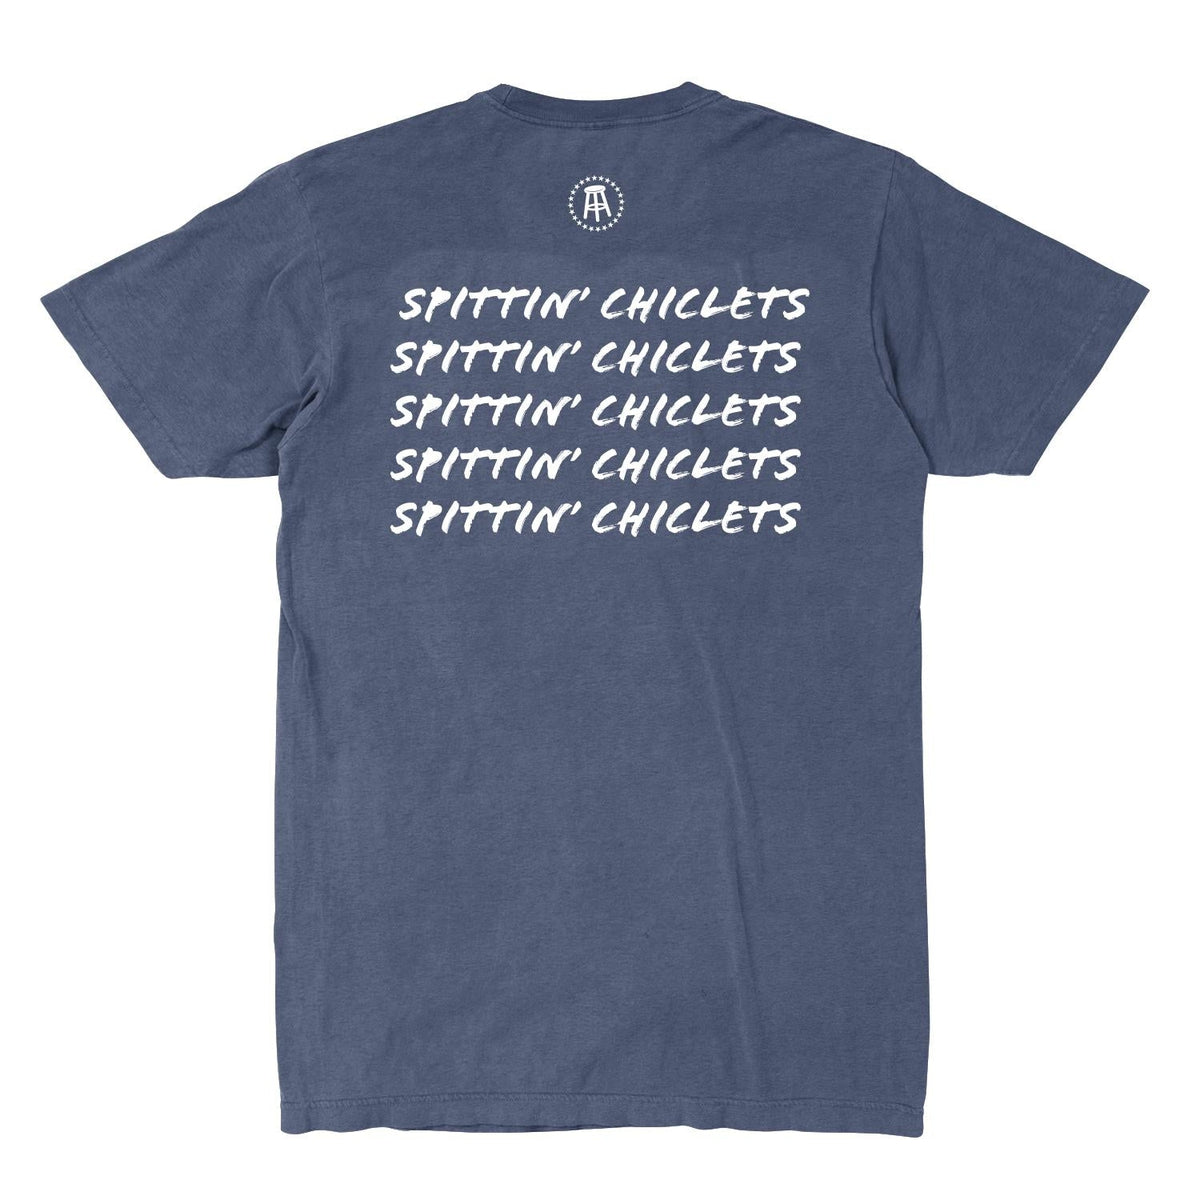 Spittin Chiclets Repeat Tee